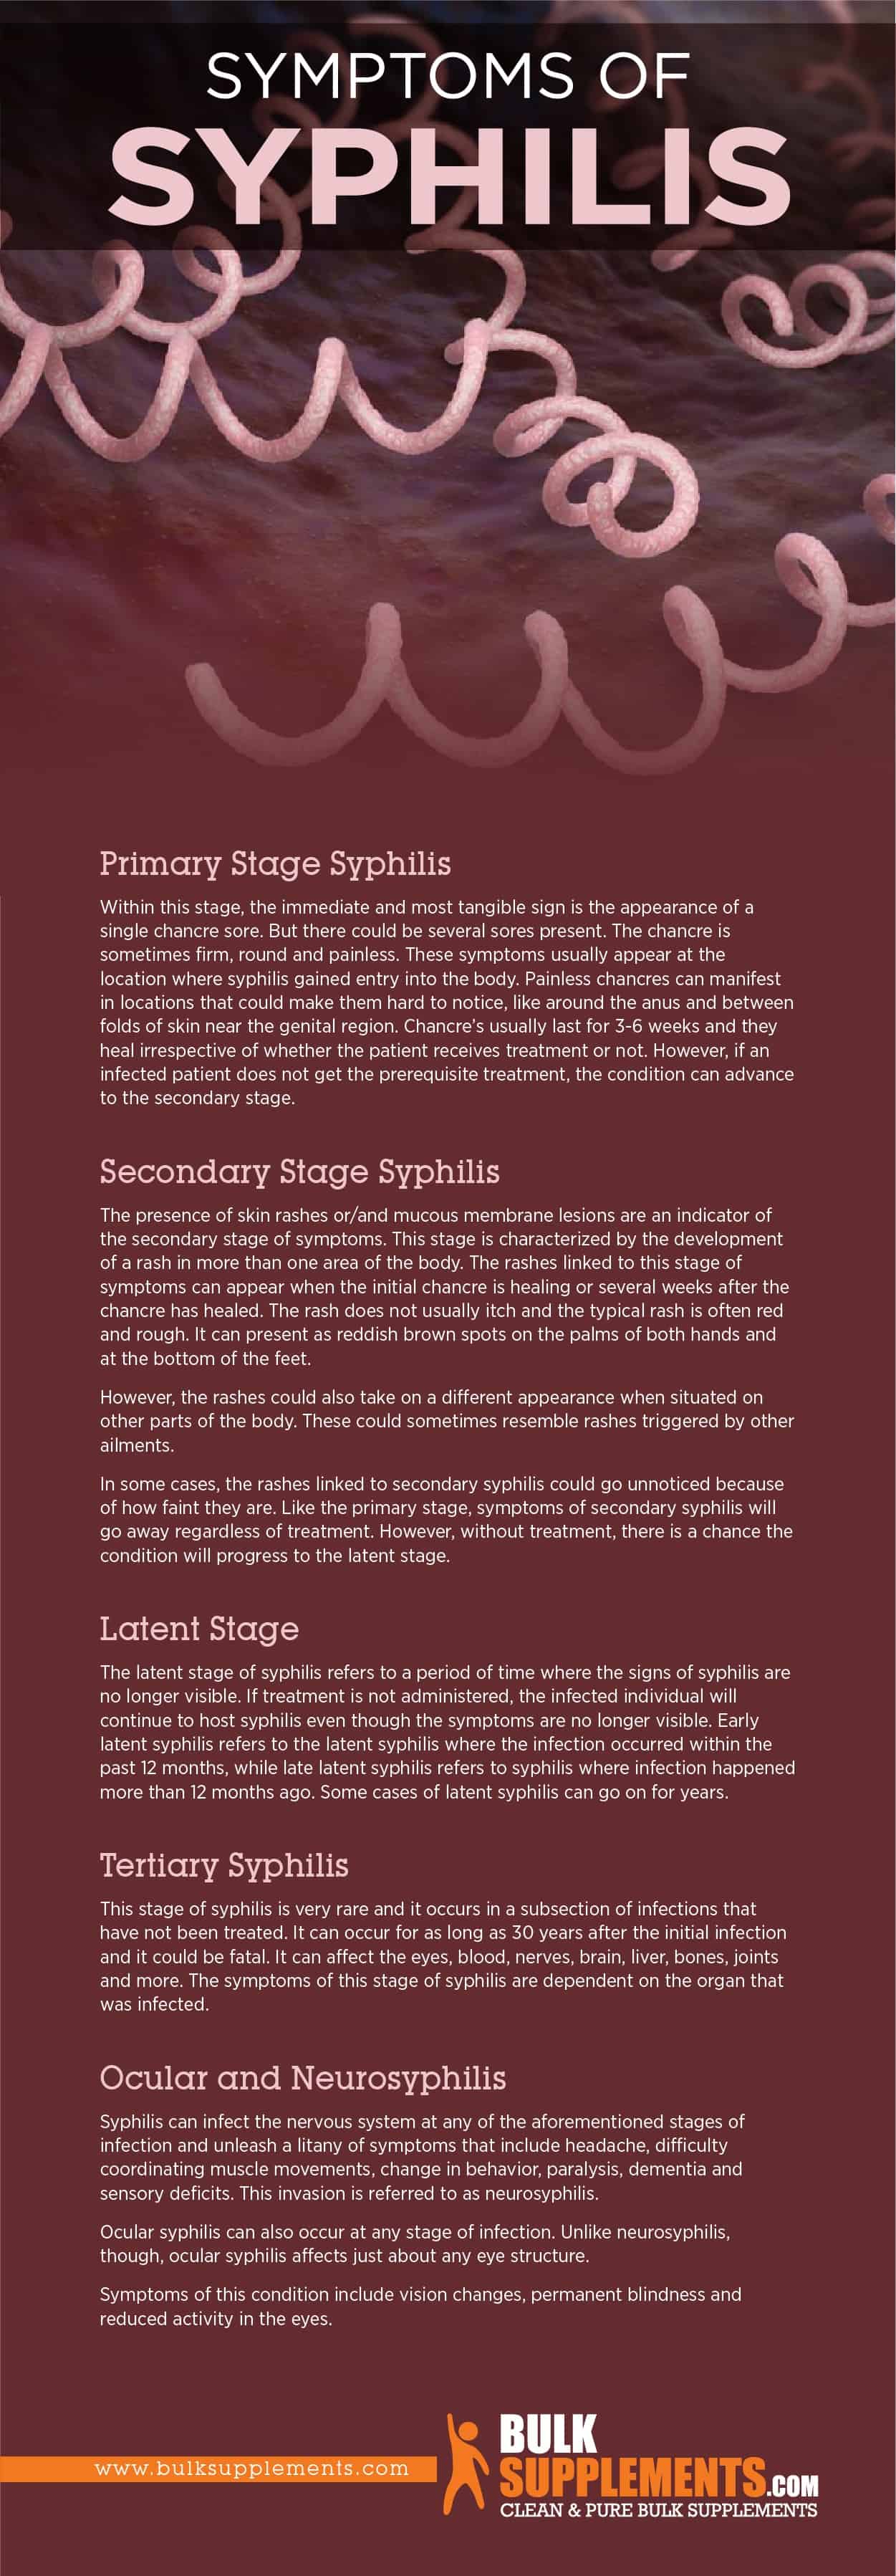 Syphilis Symptoms Causes And Treatment